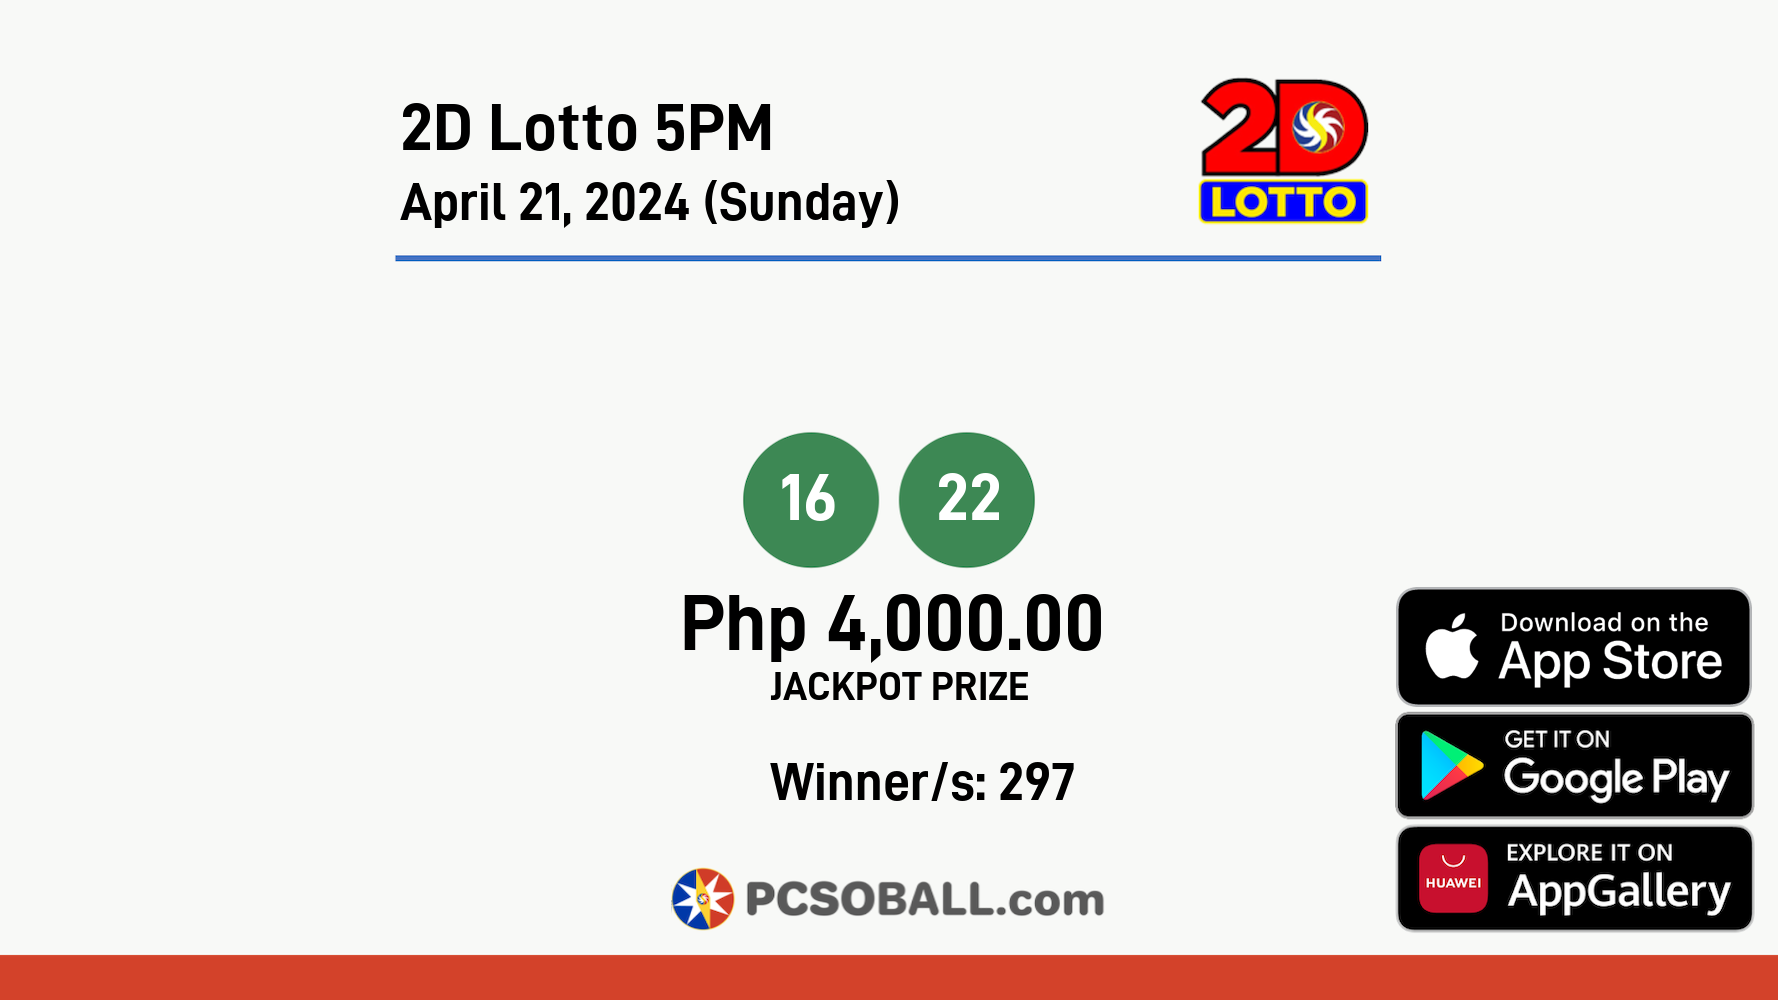 2D Lotto 5PM April 21, 2024 (Sunday) Result